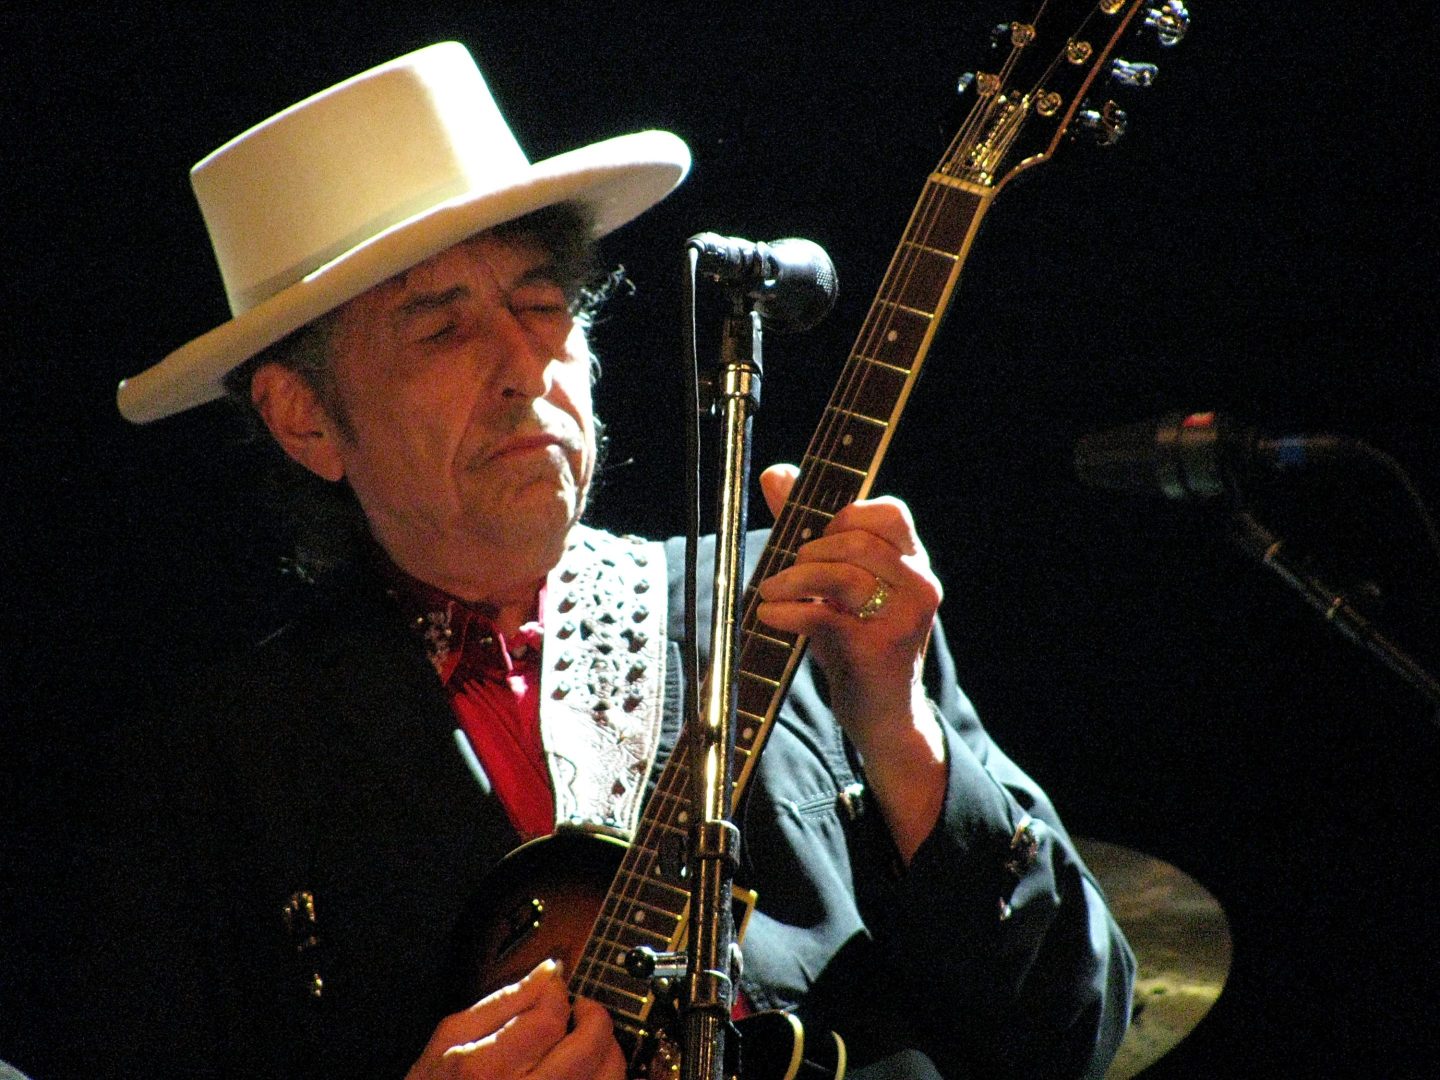 ROUND ROCK, TX &#8211; AUGUST 04:  Musician/singer Bob Dylan performs at The Dell Diamond on August 4, 2009 in Round Rock, Texas.  (Photo by Gary Miller/FilmMagic)